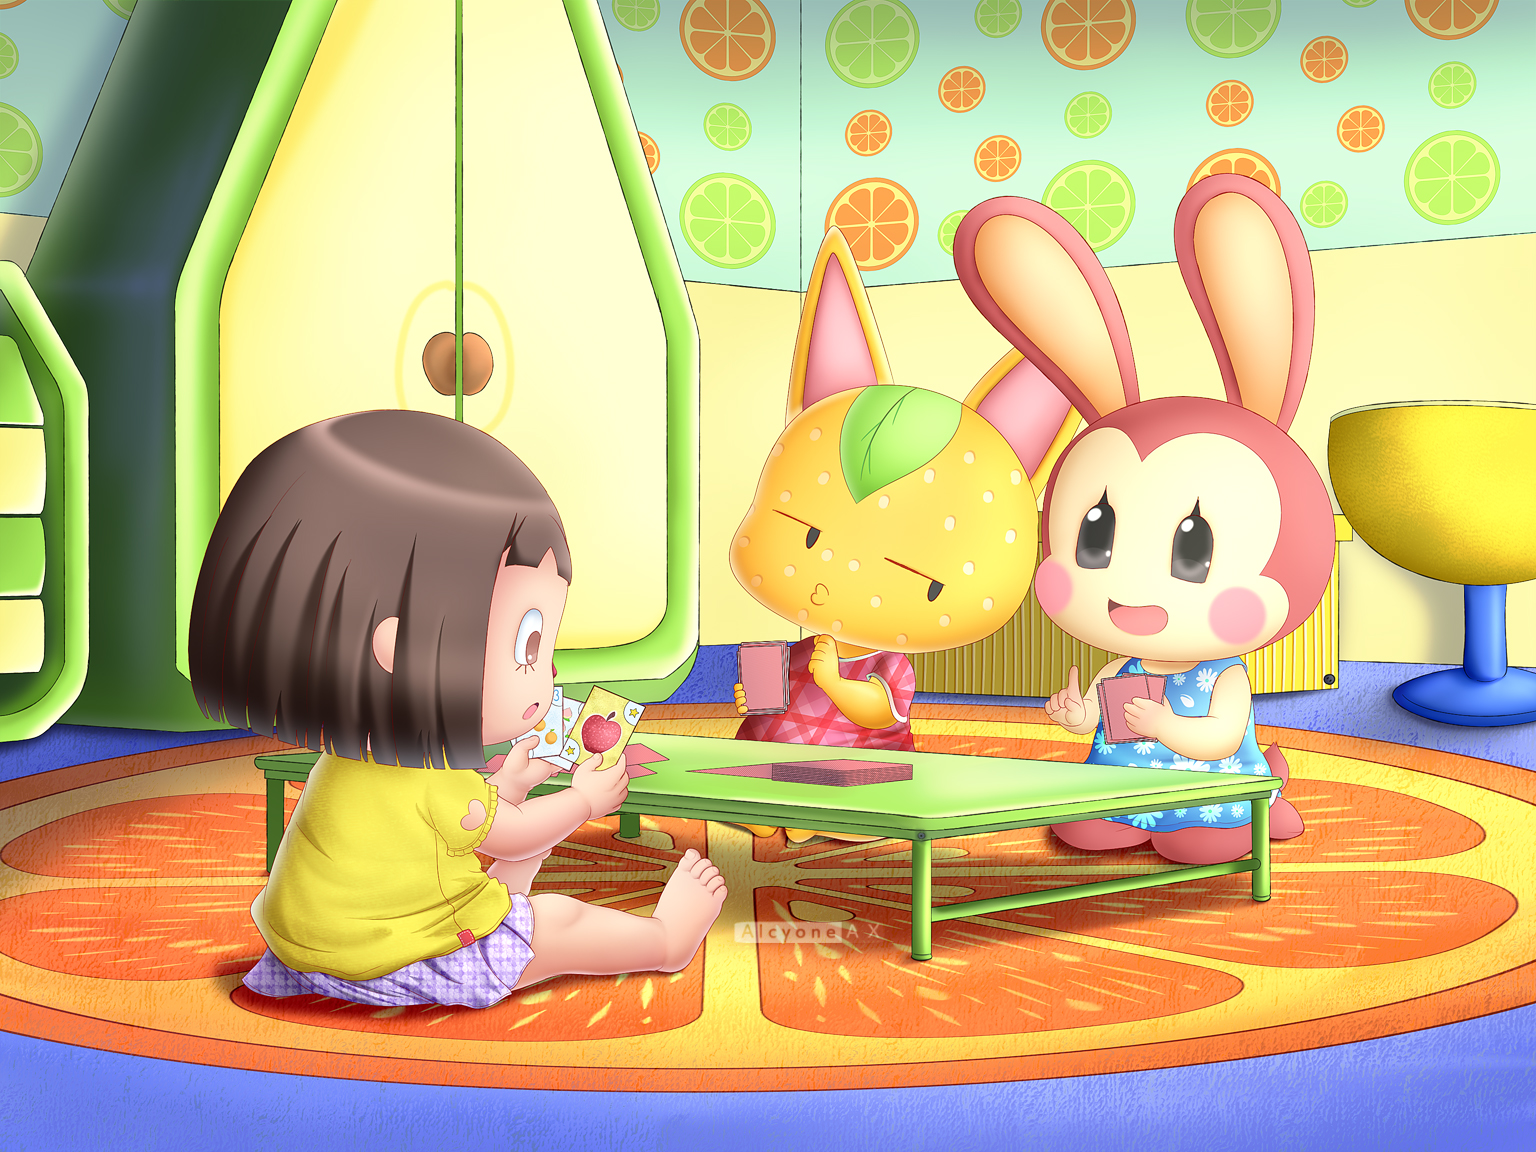 villager, tangy, and bunnie (animal crossing) drawn by alcyoneax | Danbooru